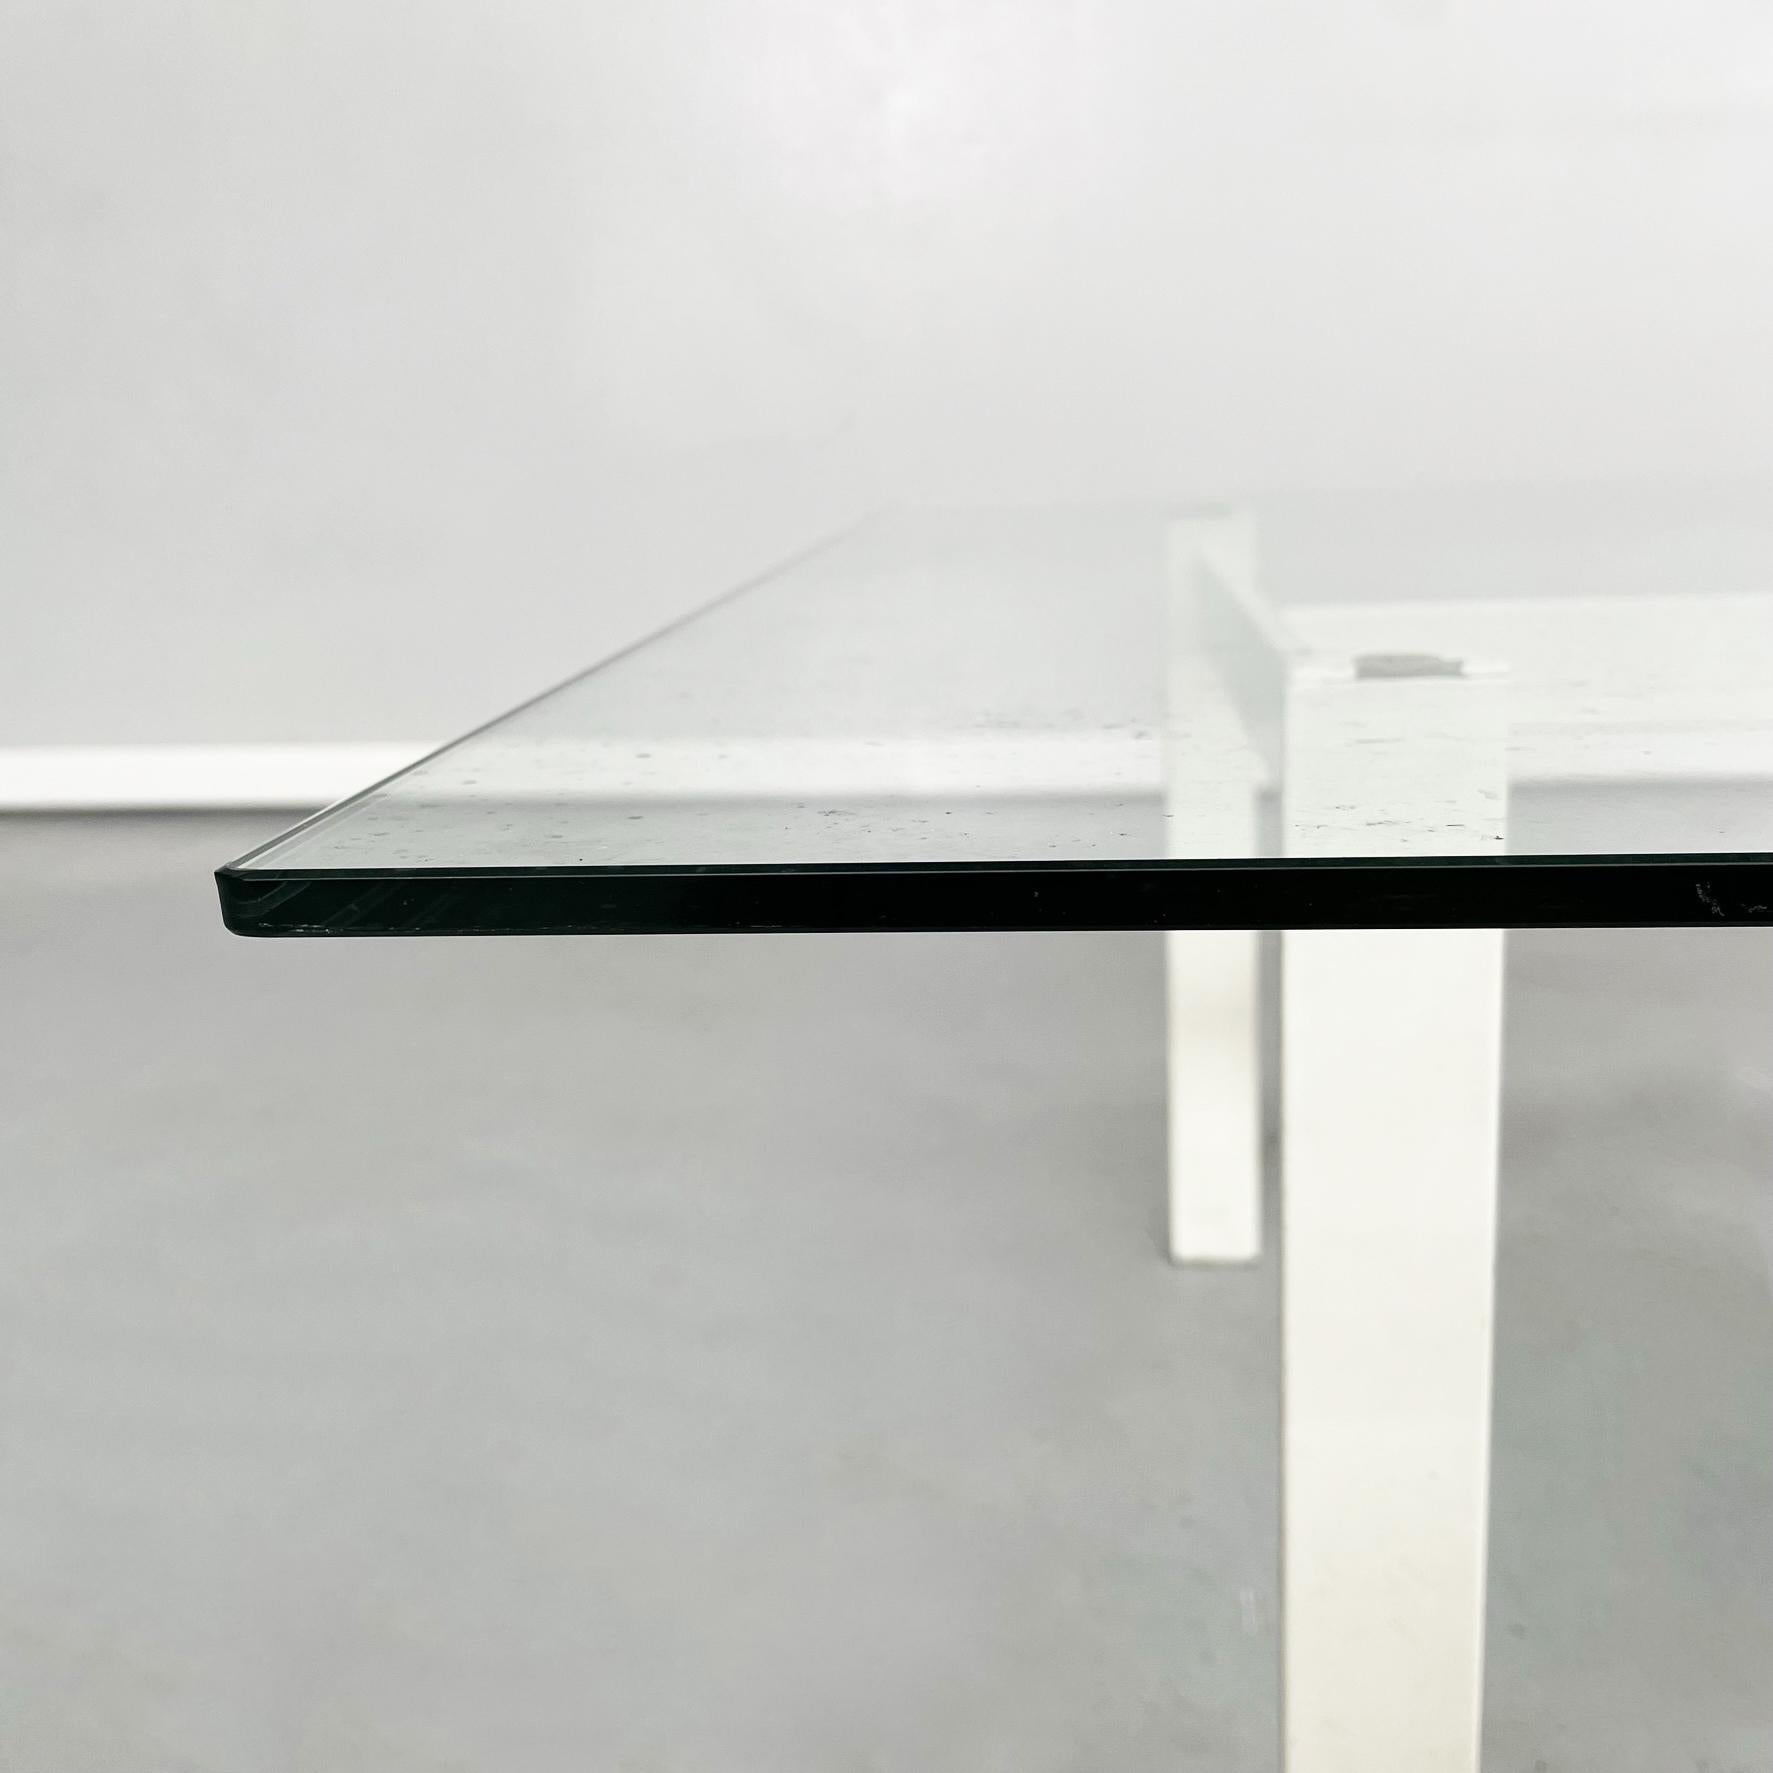 Late 20th Century Italian Mid-Century Square Coffee Table Glass, Iron and Marquinia Marble, 1980s For Sale